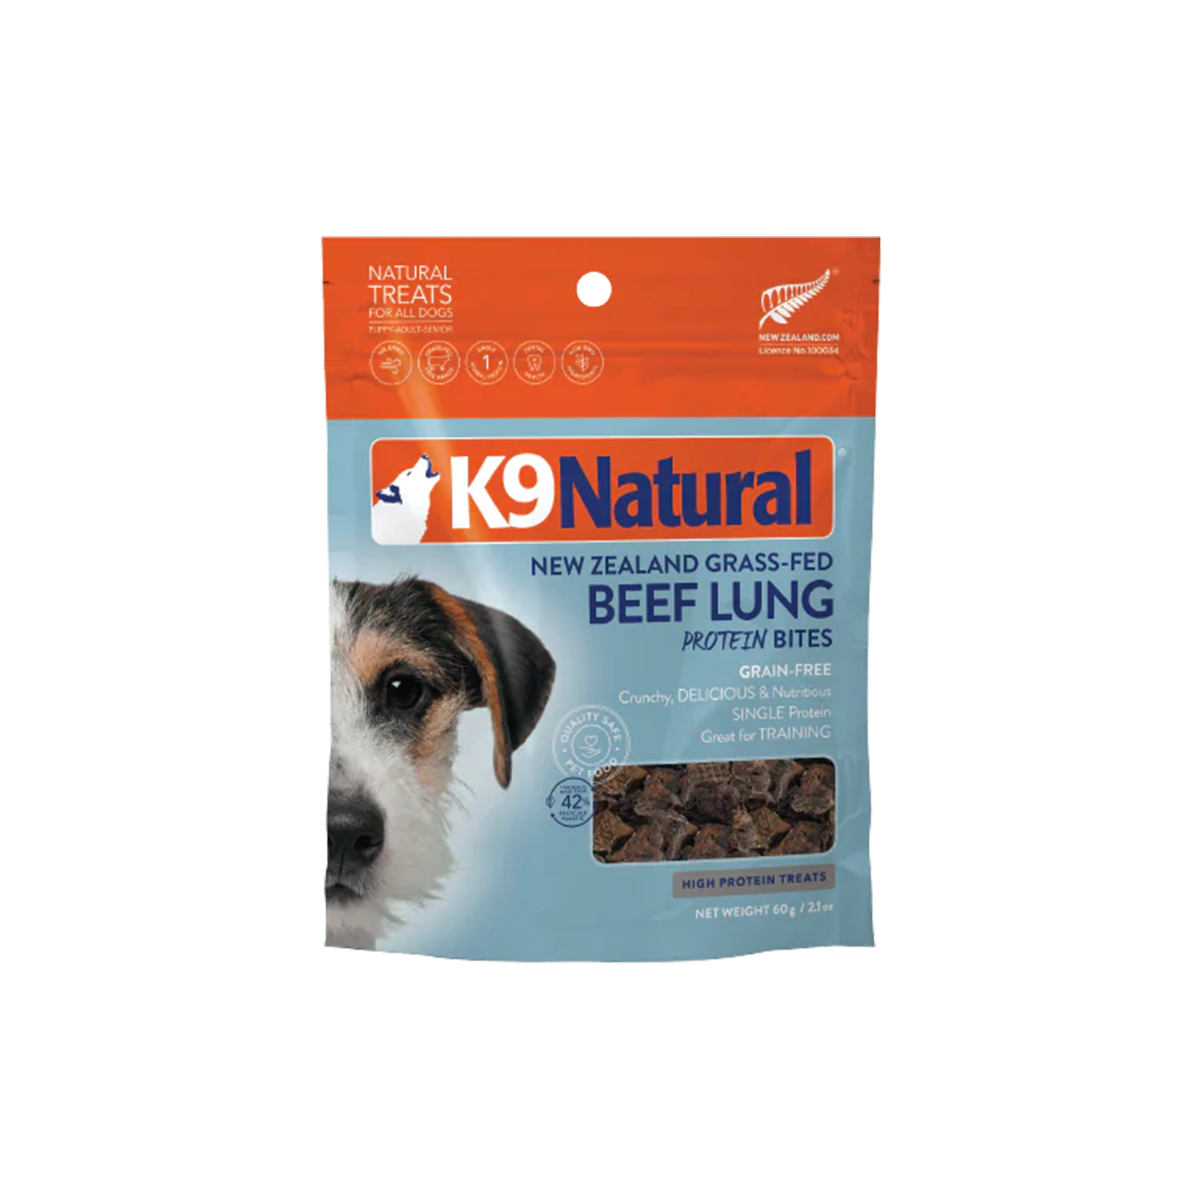 K9 Natural Air-Dried Protein Bites Dog Treats - Beef Lung